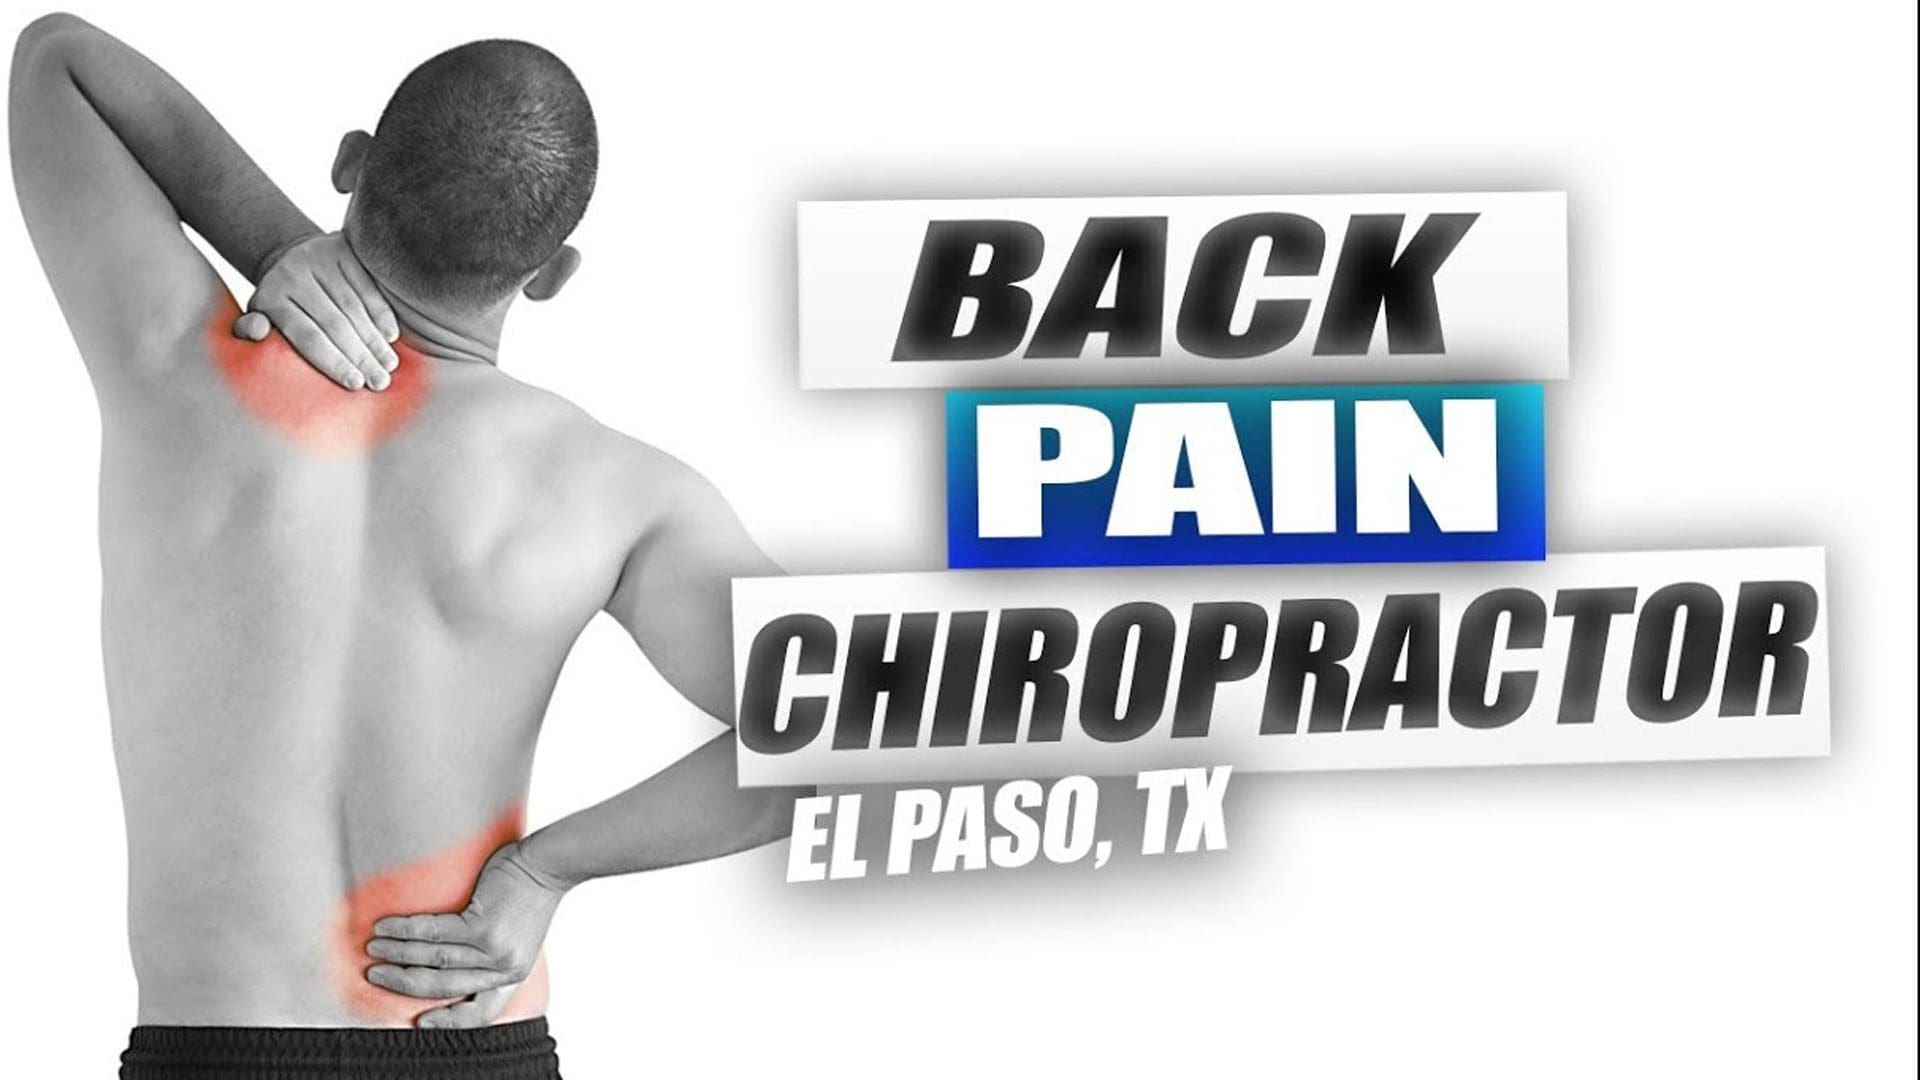 chiropractic care back pain el paso tx.